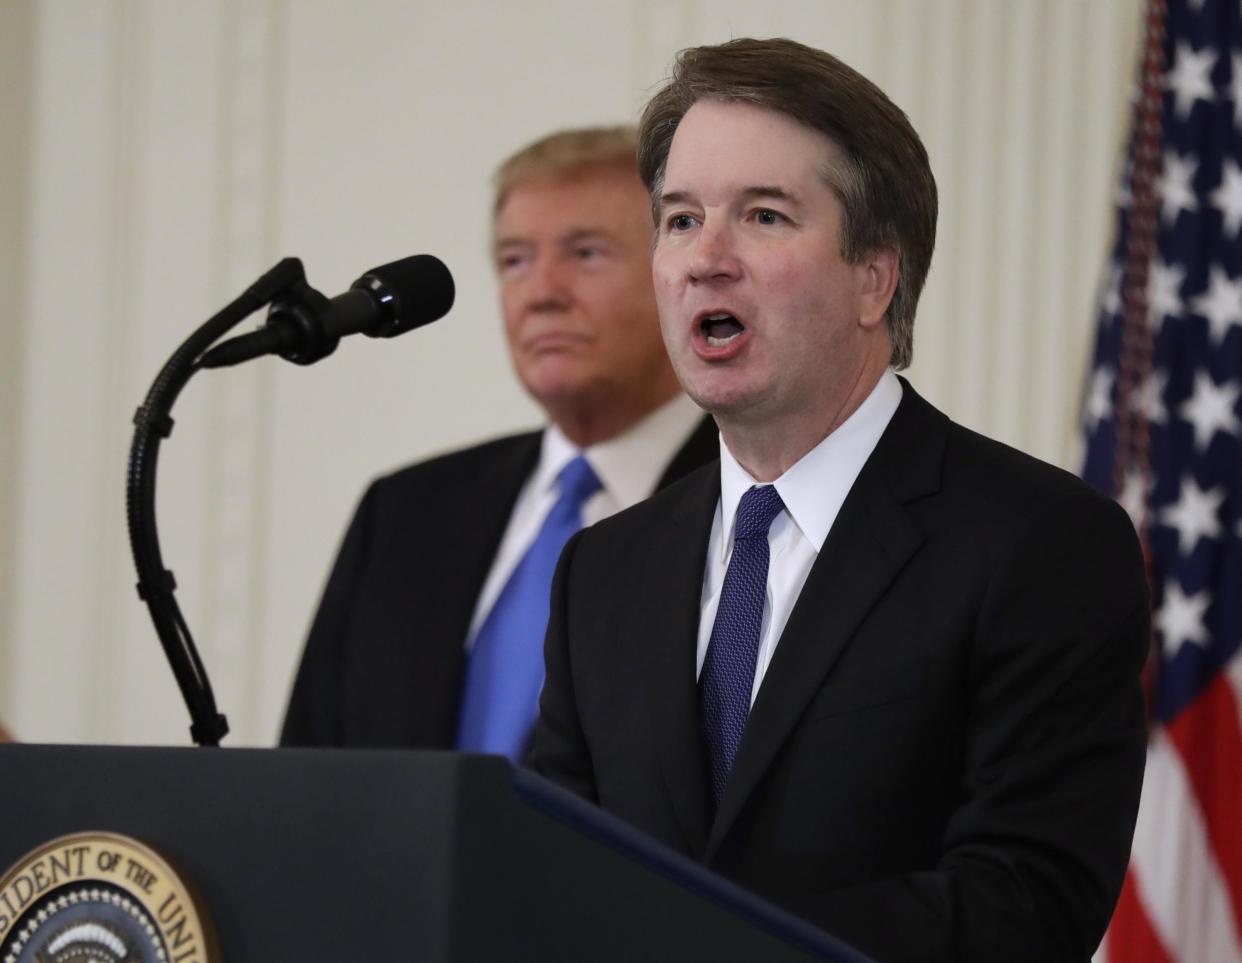 Republicans are attempting to push a vote on Supreme Court nominee Brett Kavanaugh before Democrats can review his bevy of writings from his tenure as George W Bush's staff secretary: AP